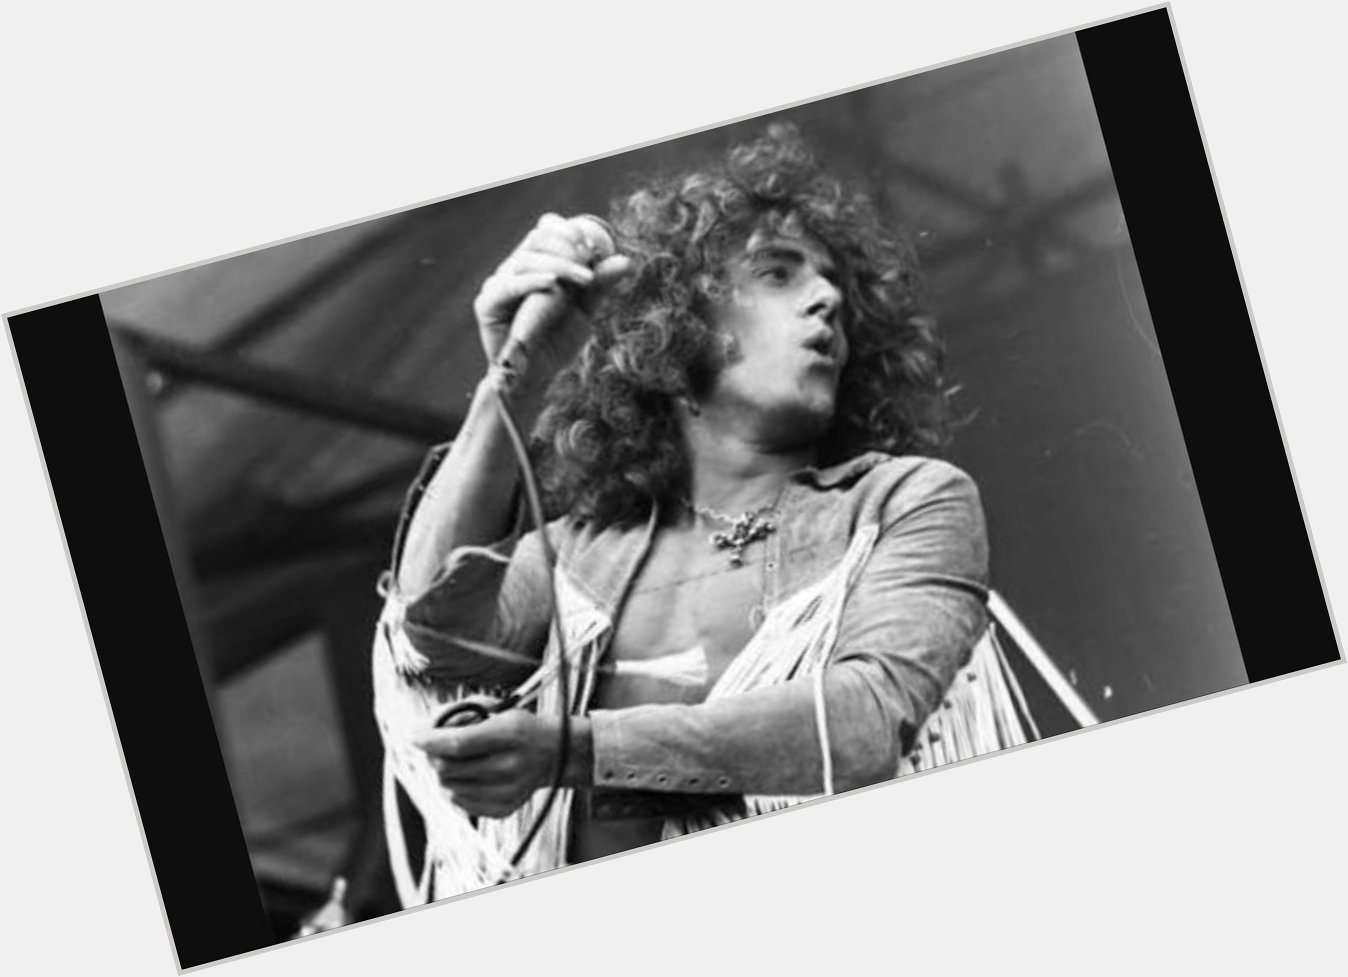 Happy birthday to the legendary Roger Daltrey. Long Live The Who! 